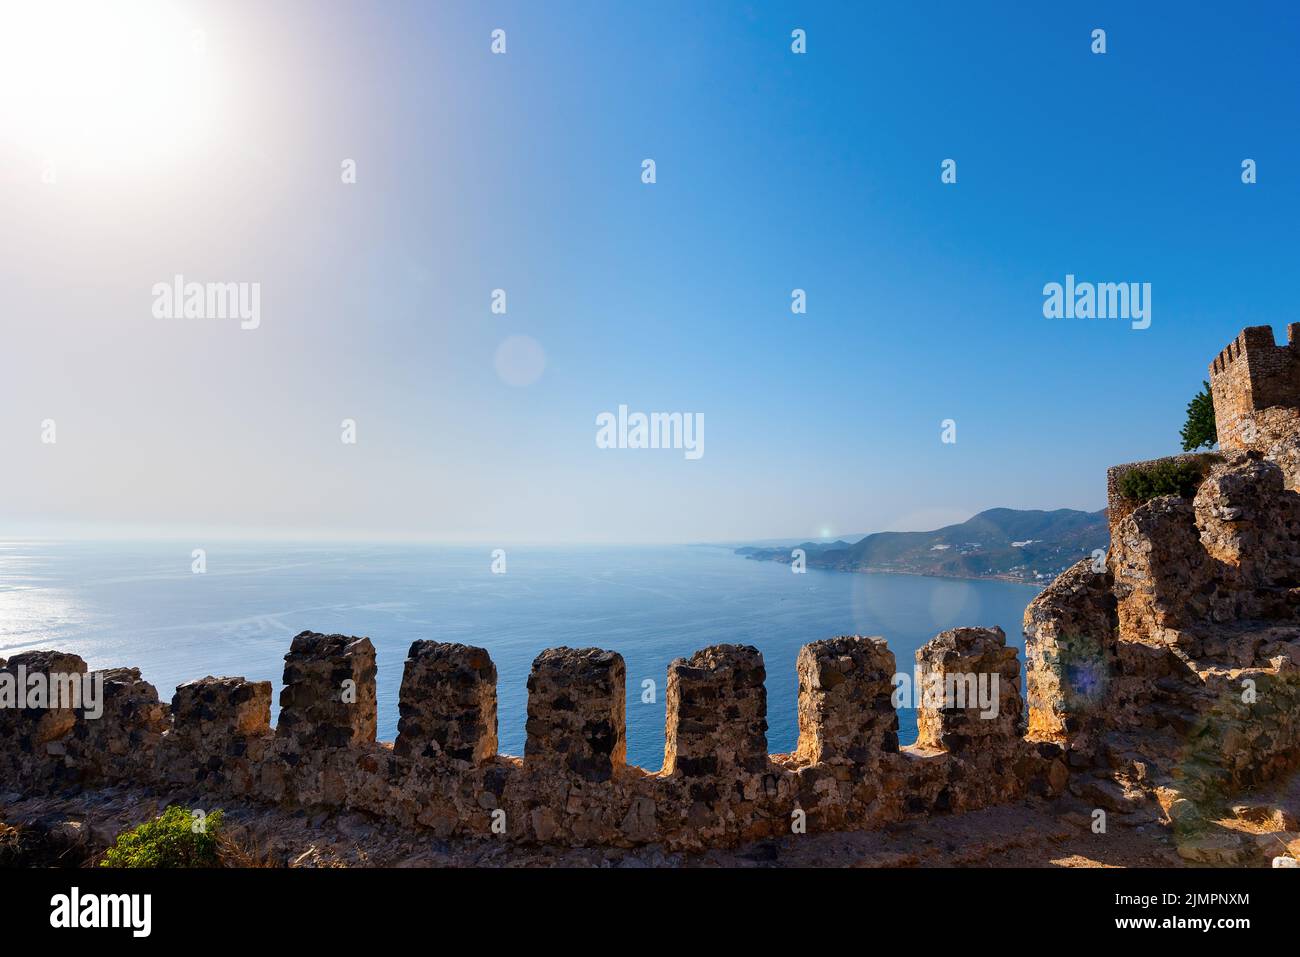 View of the Mediterranean Sea from the ruins of an old stone wall in Alanya Stock Photo